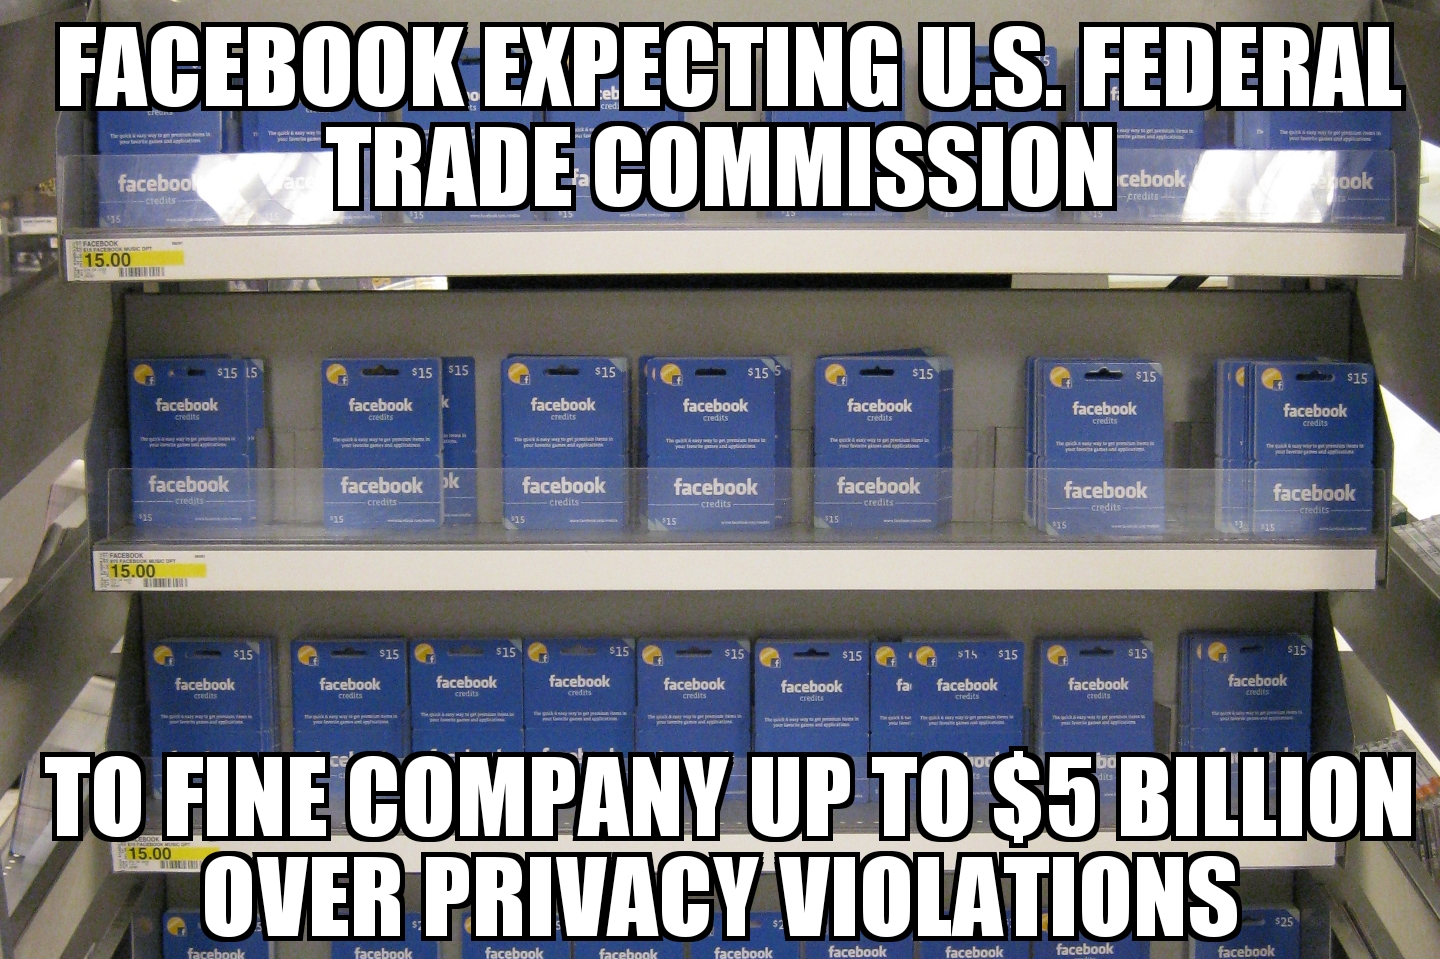 Facebook expecting up to $5 billion fine over privacy violations